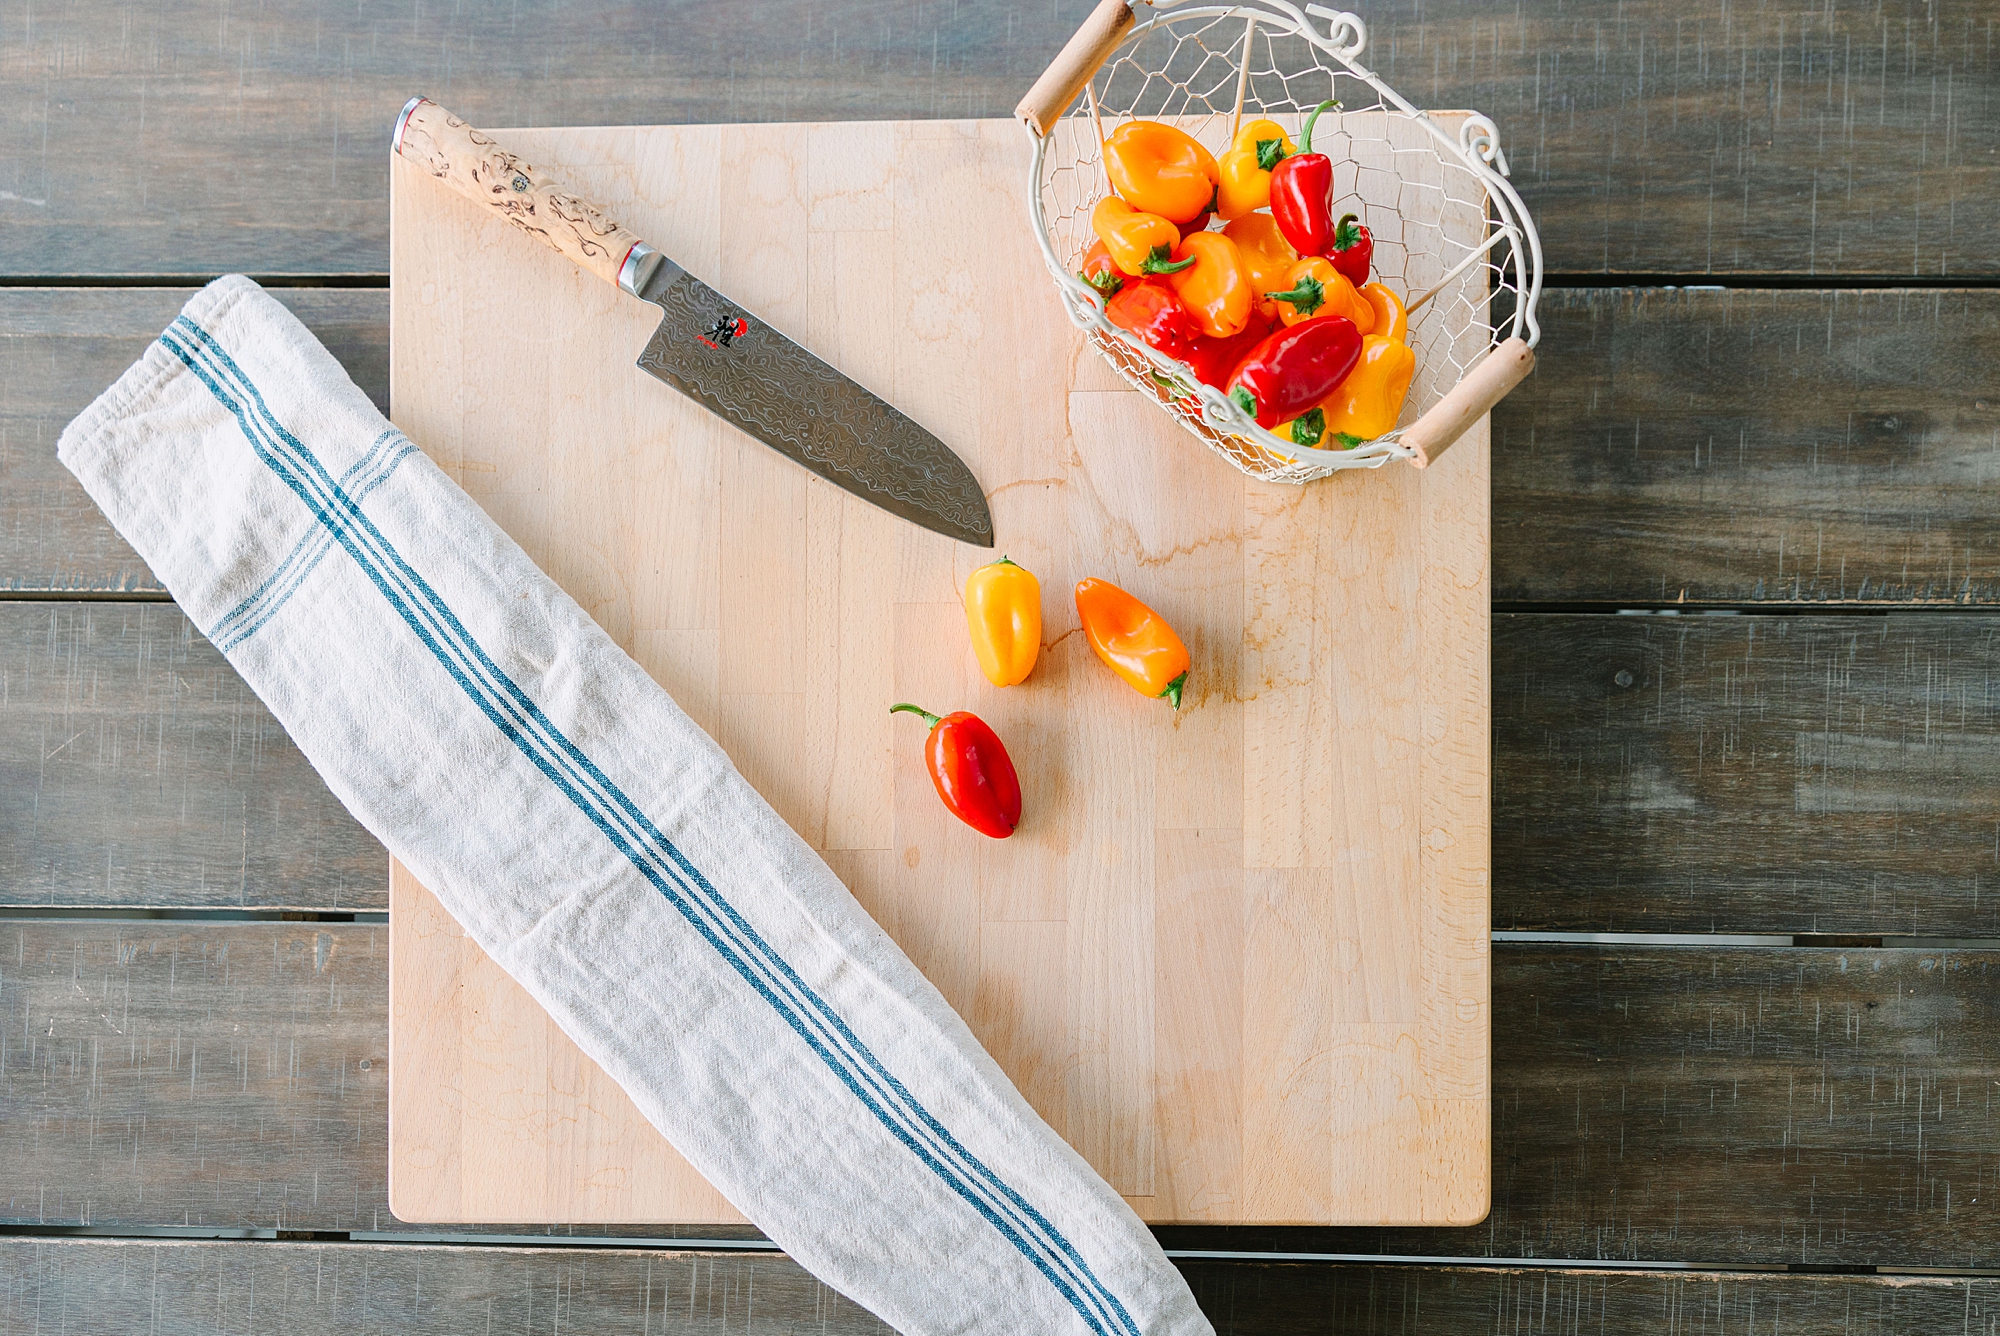 red and orange peppers lay on wooden cutting board with knife